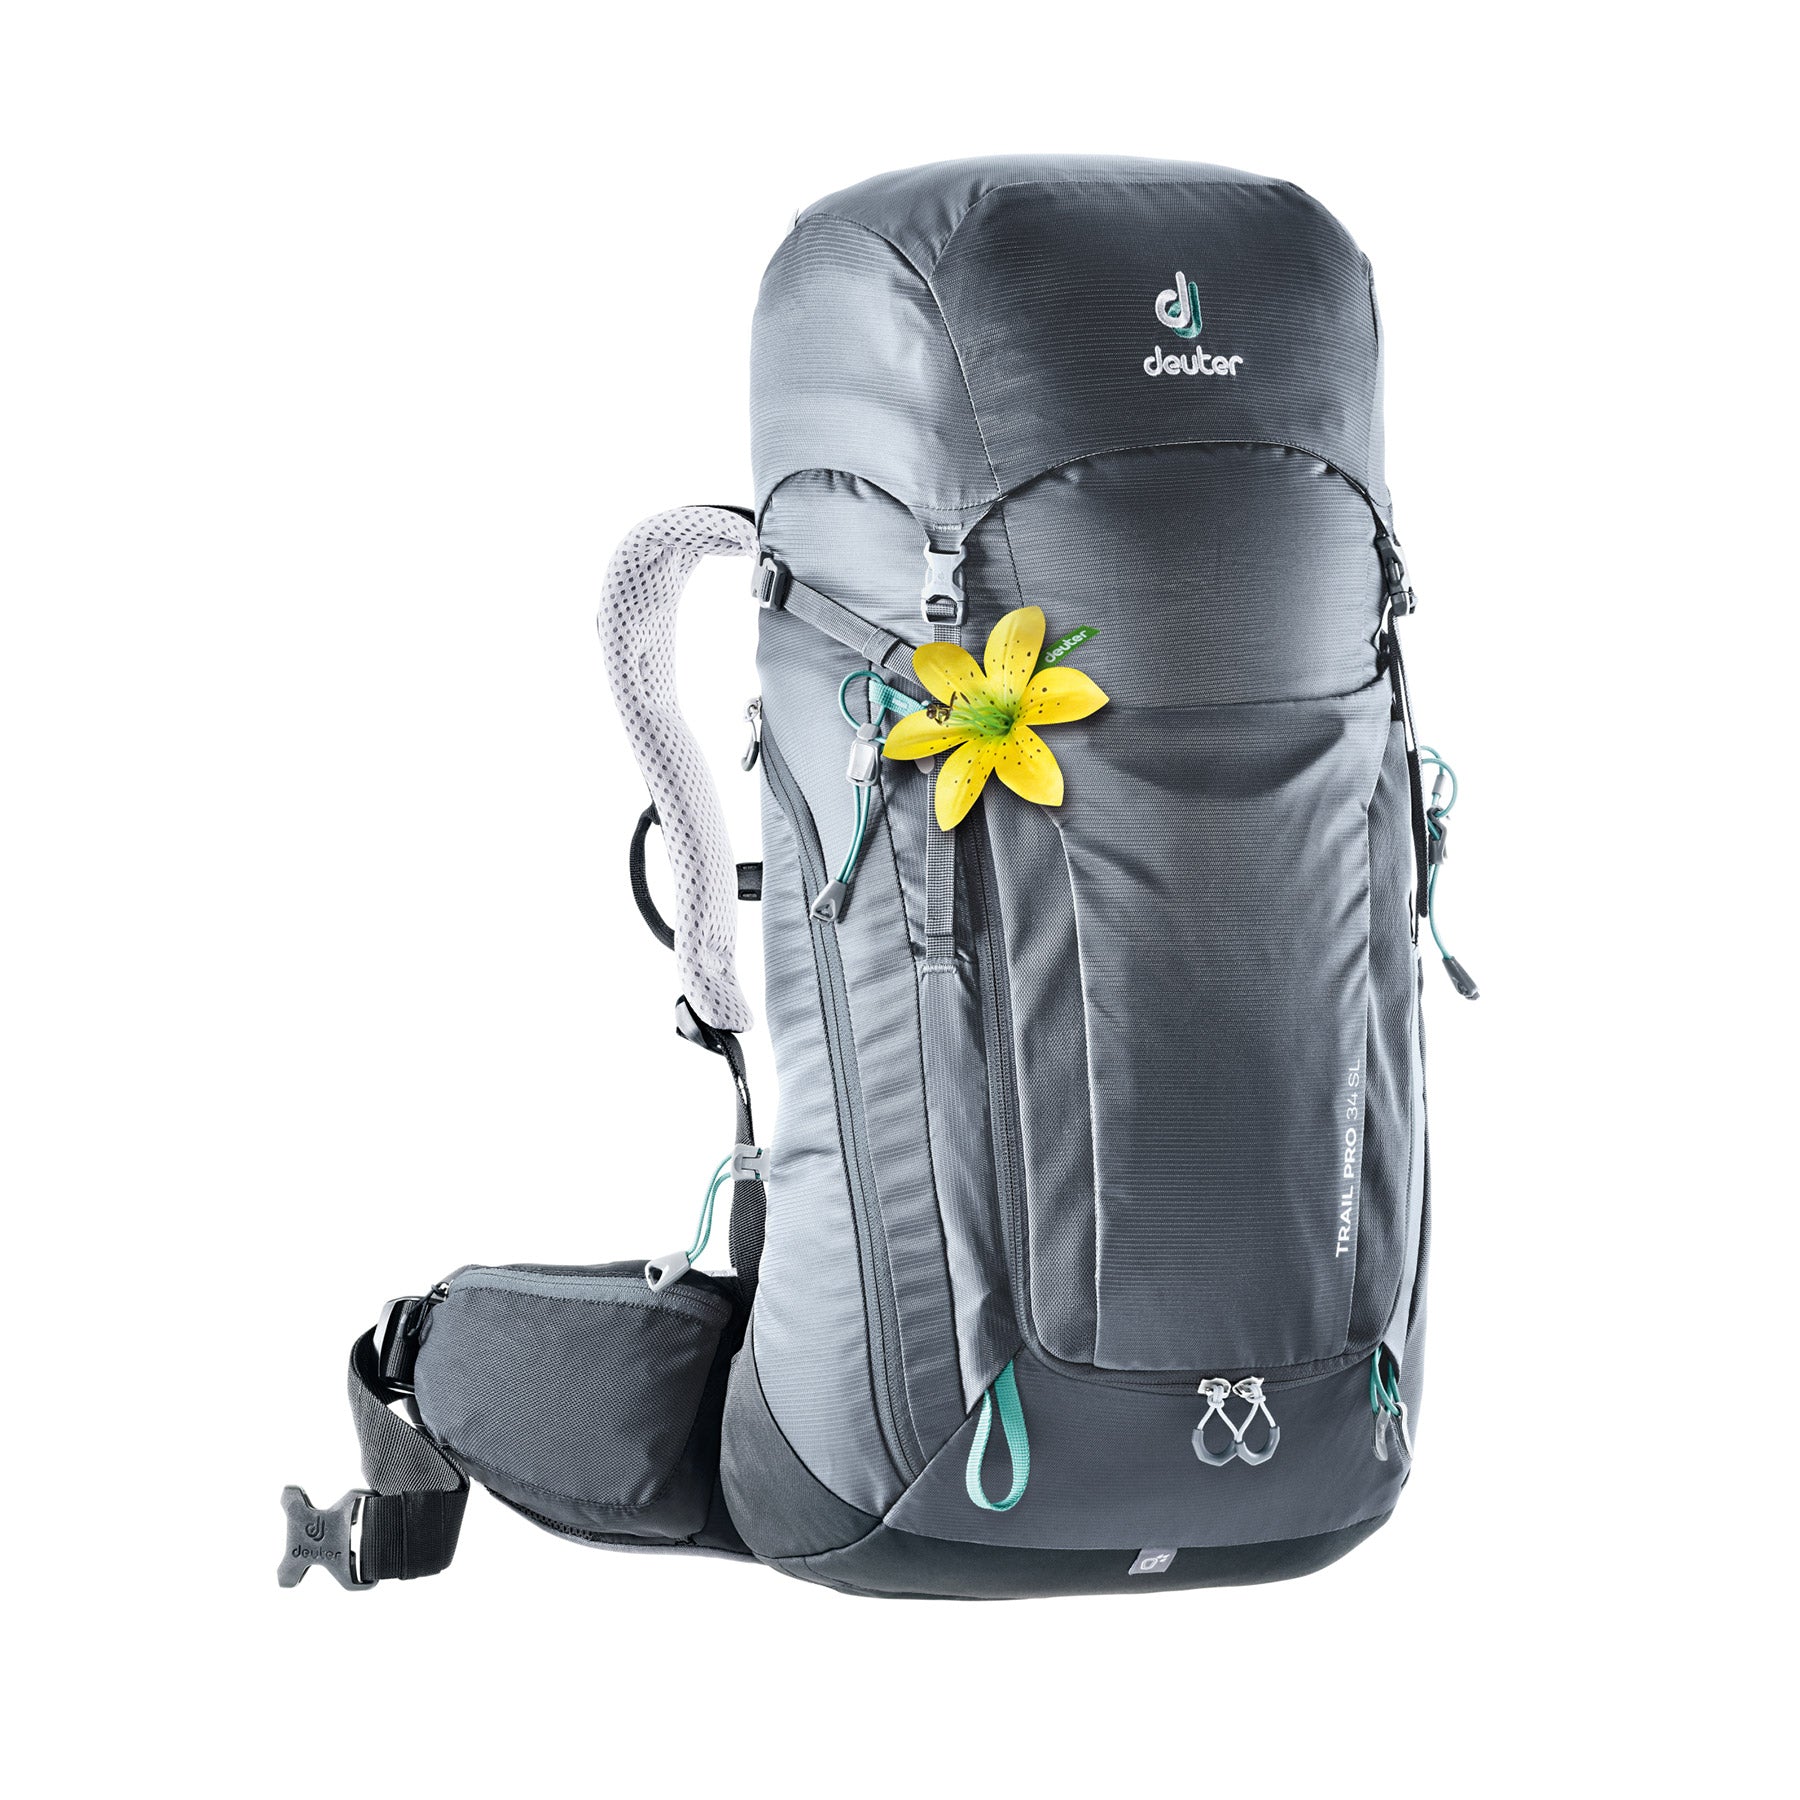 deuter trail pro 24 SL womens backpack front view in color grey with aqua details